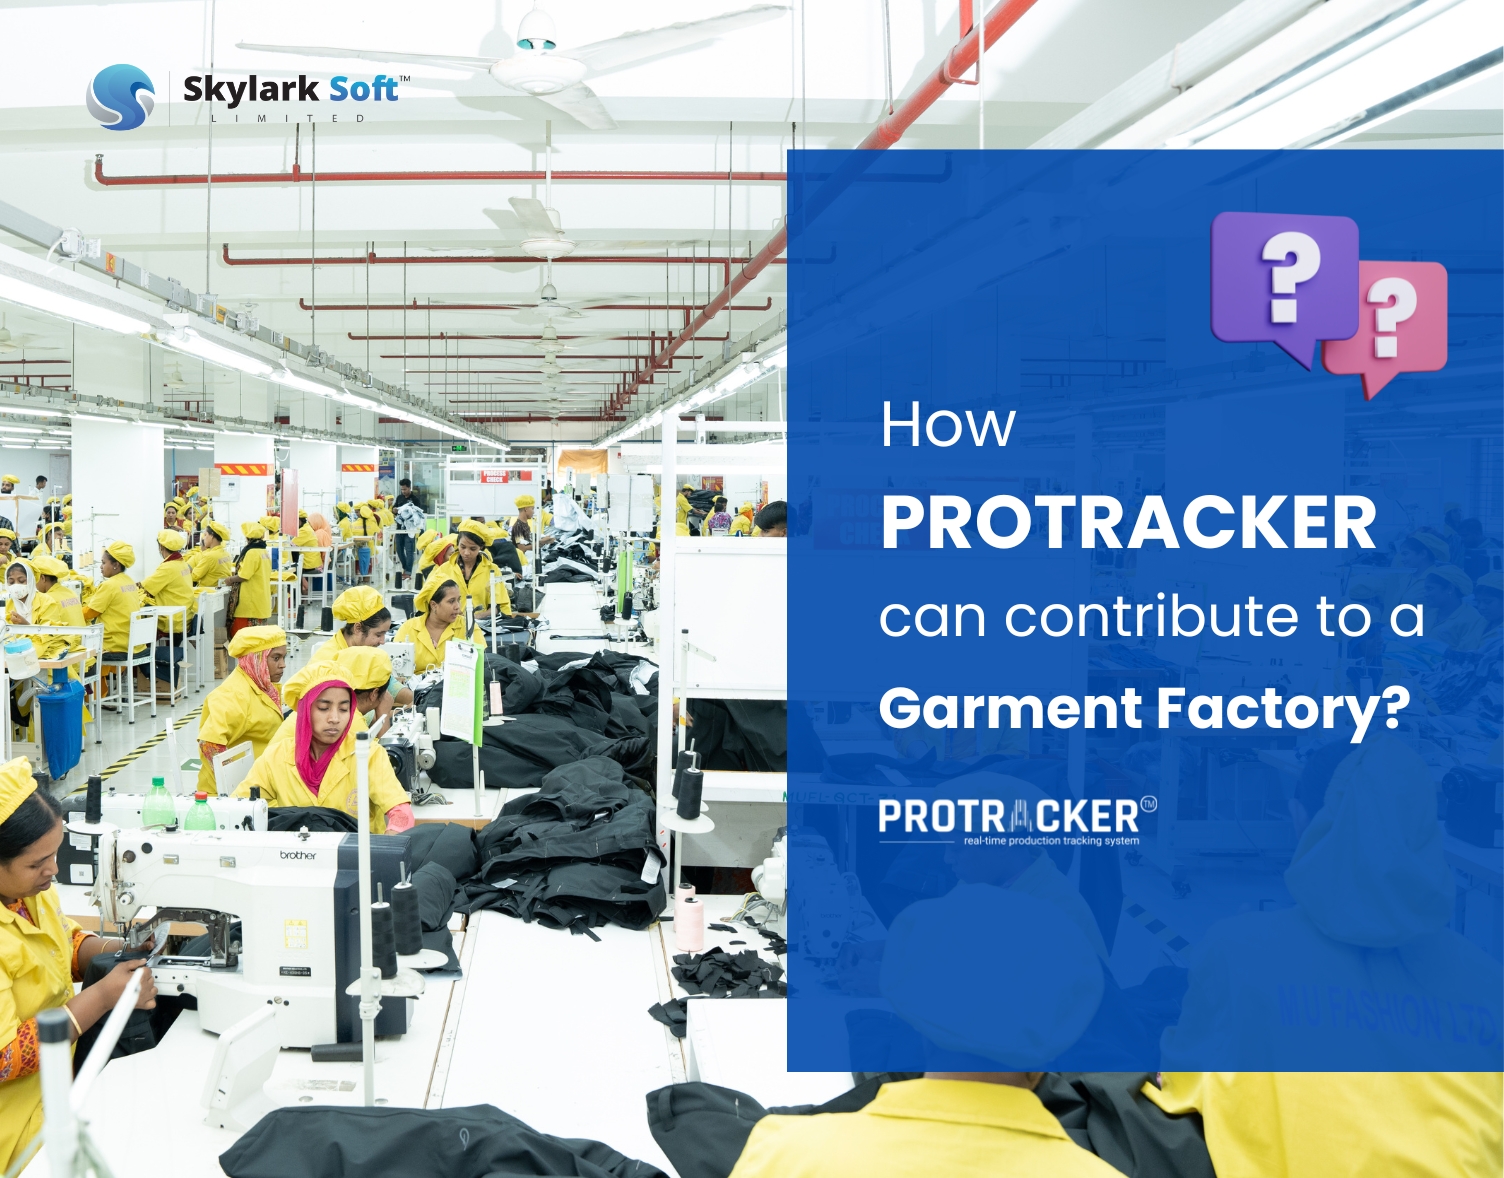 HOW PROTRACKER CAN CONTRIBUTE TO A GARMENT FACTORY